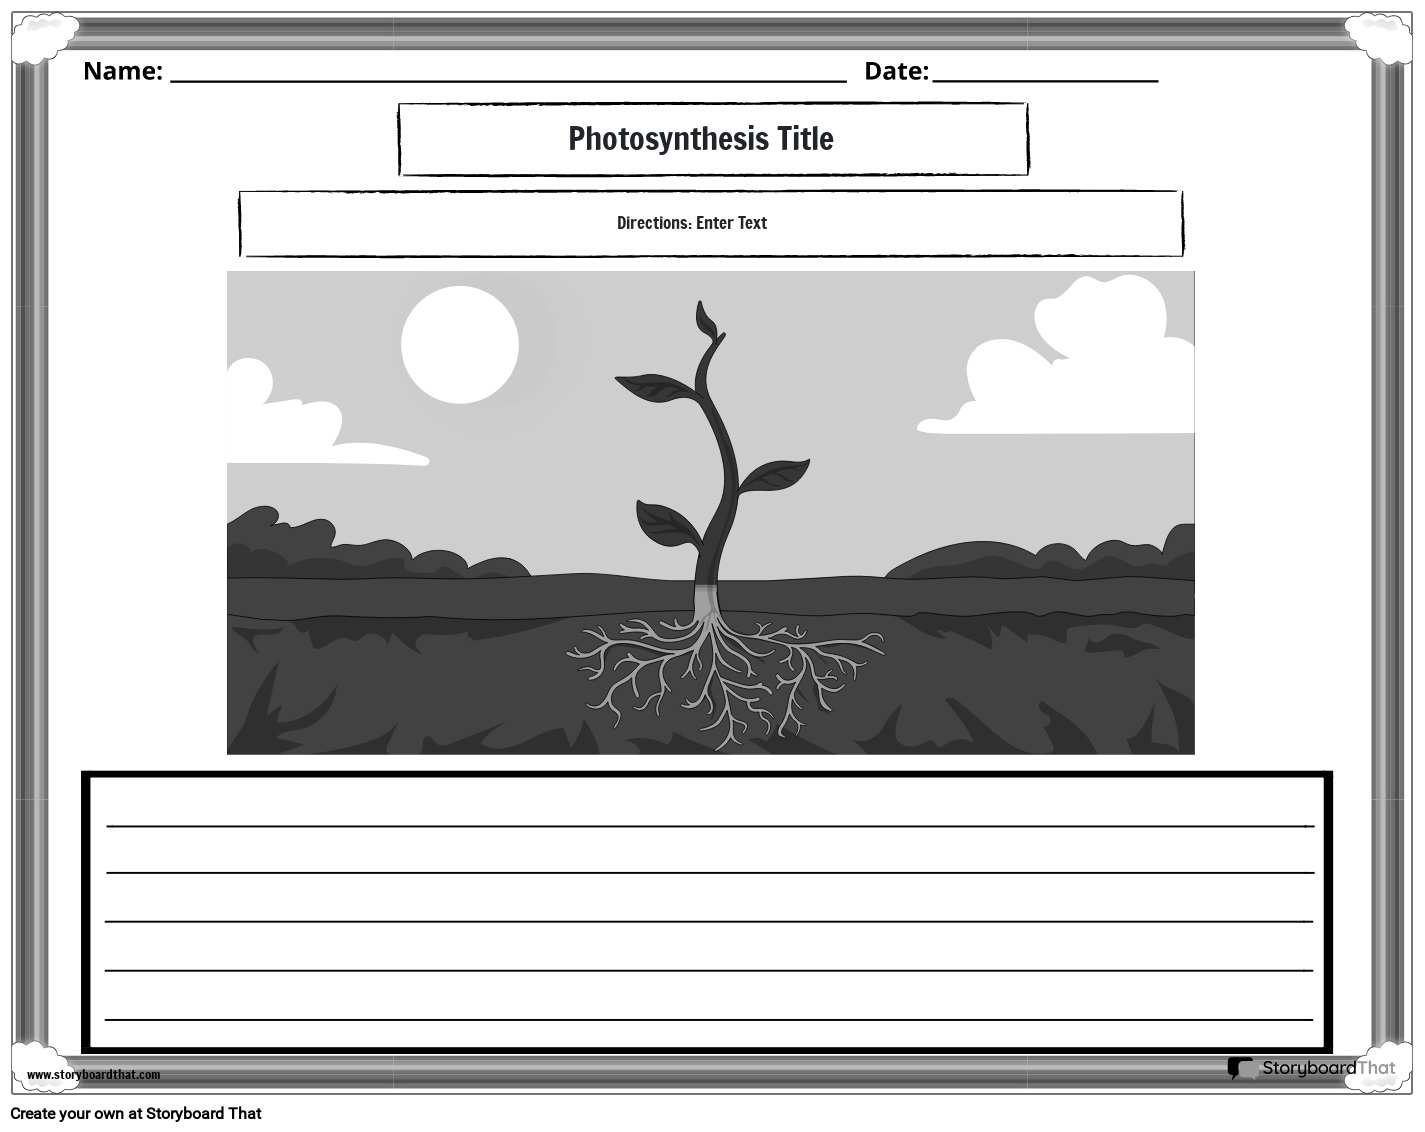 free-photosynthesis-worksheets-learn-cellular-respiration